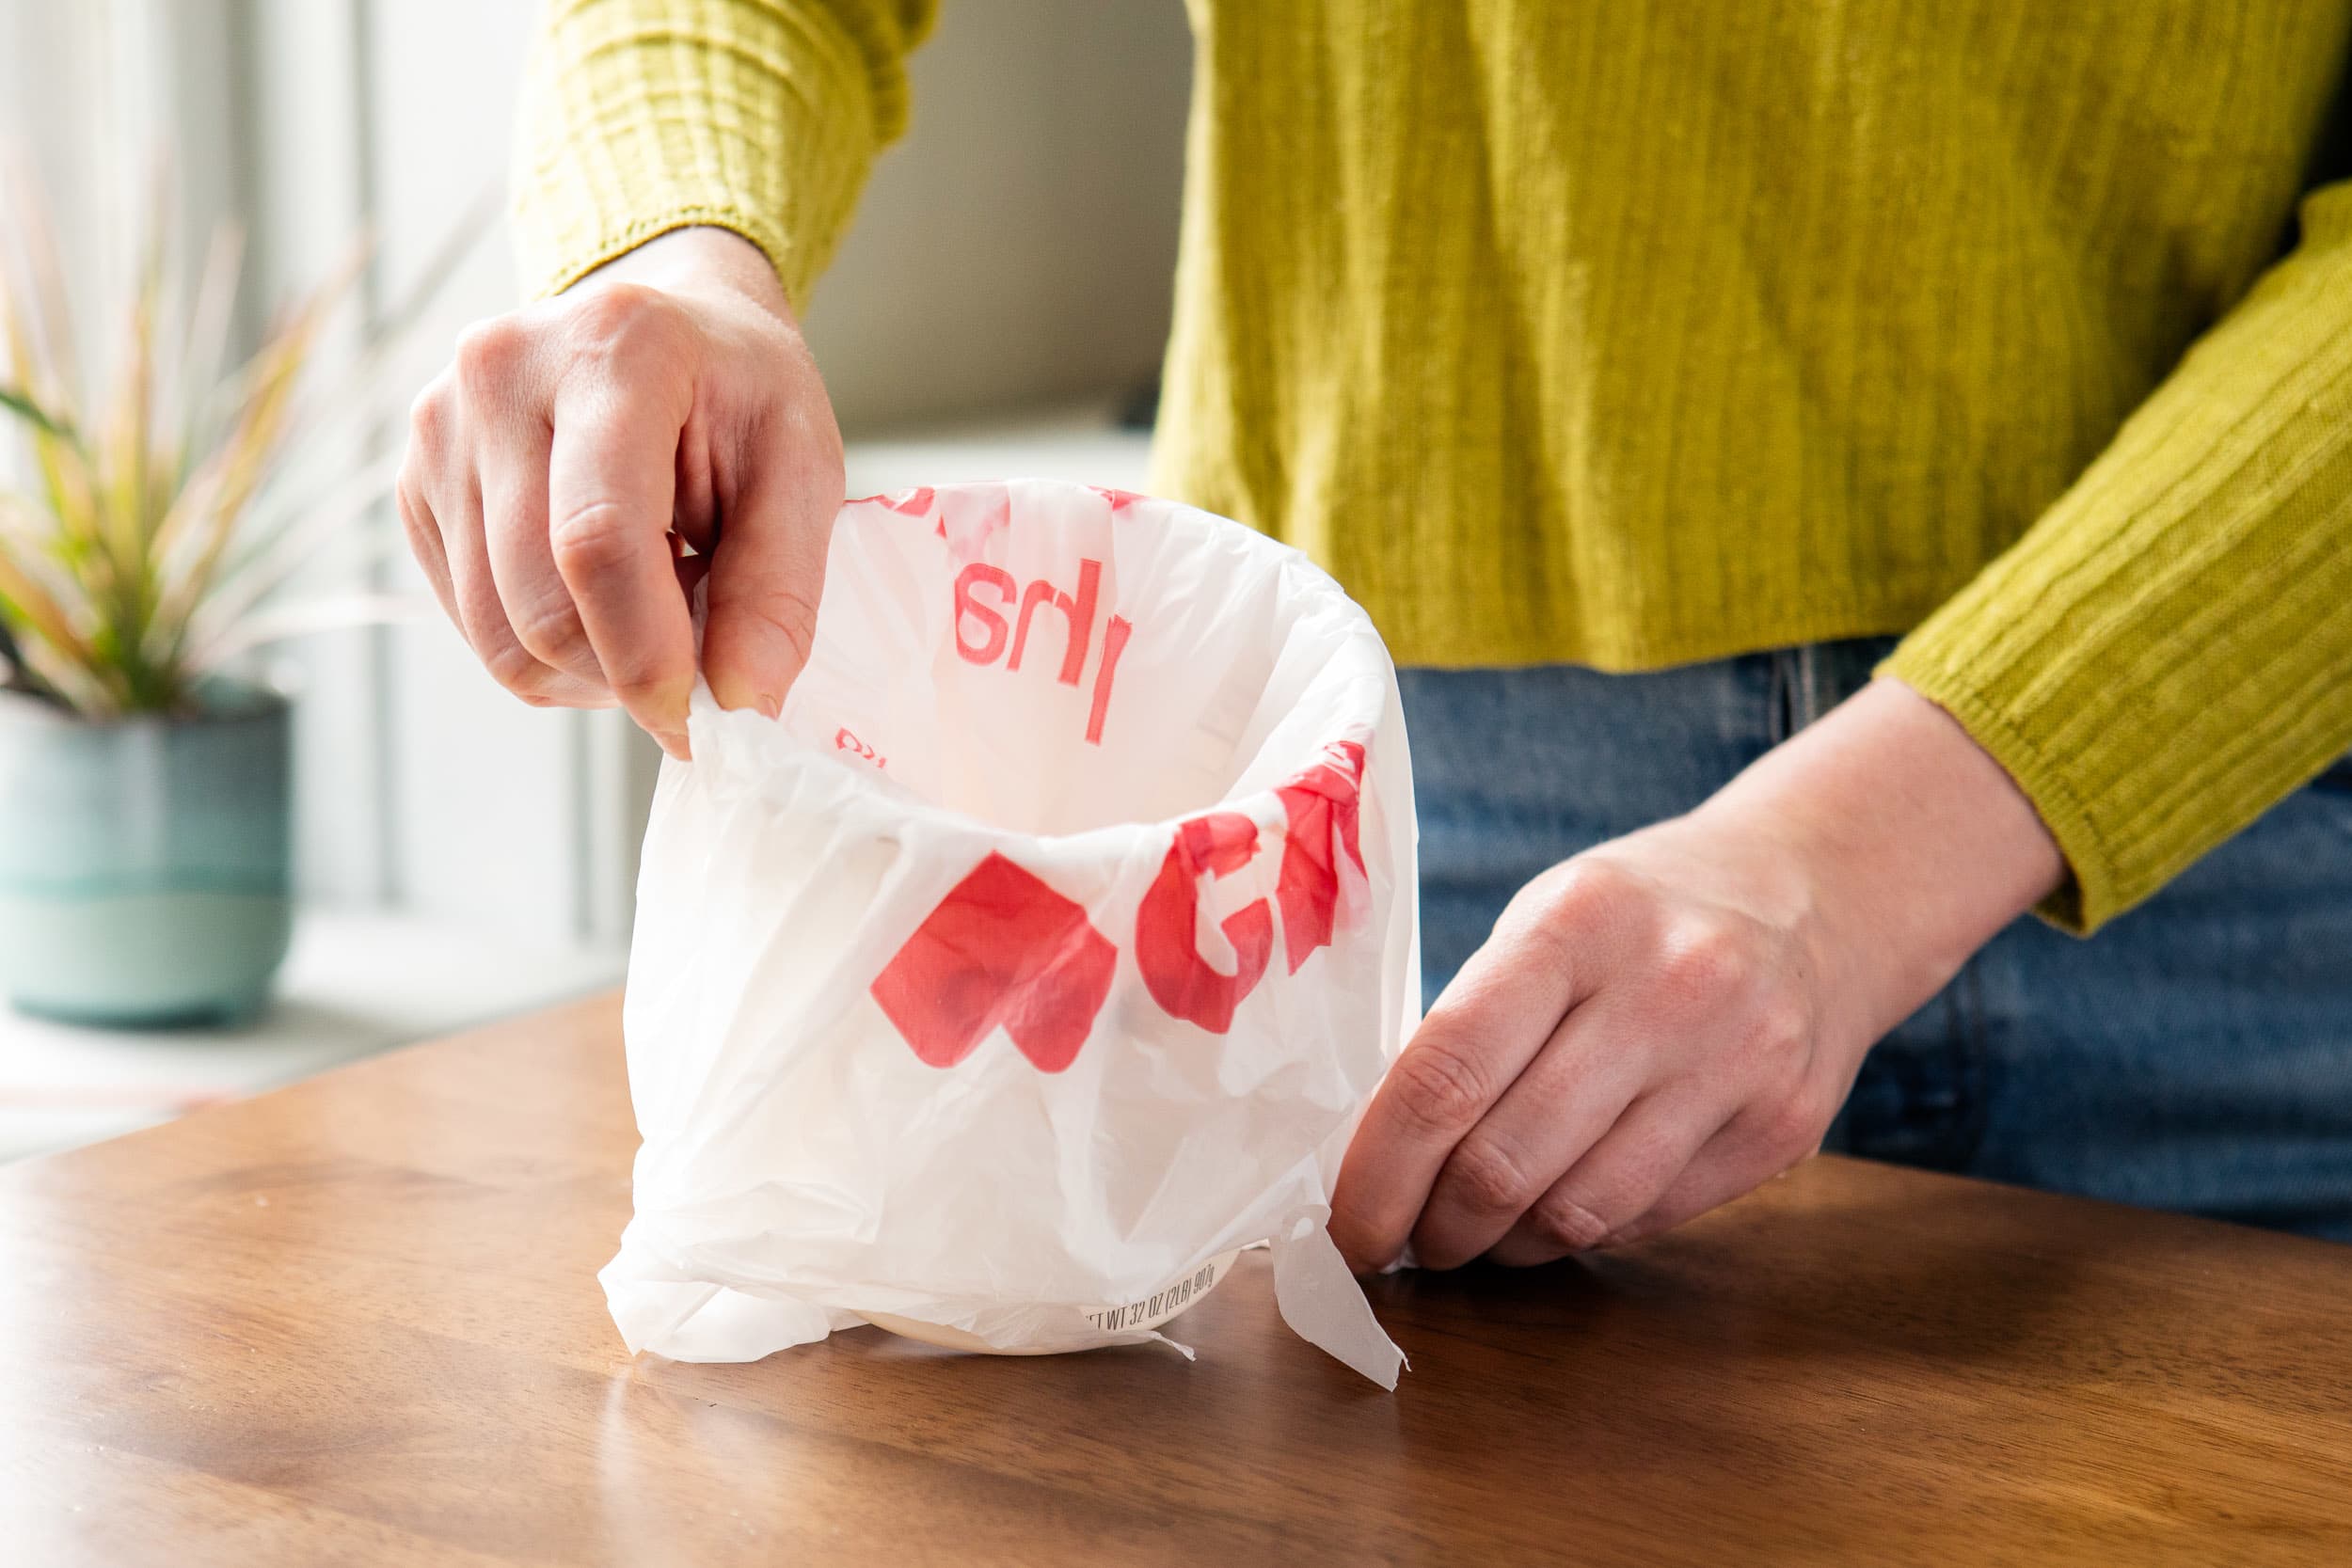 THE BEST WAYS TO MAKE USE OF YOUR REUSABLE SHOPPING BAGS